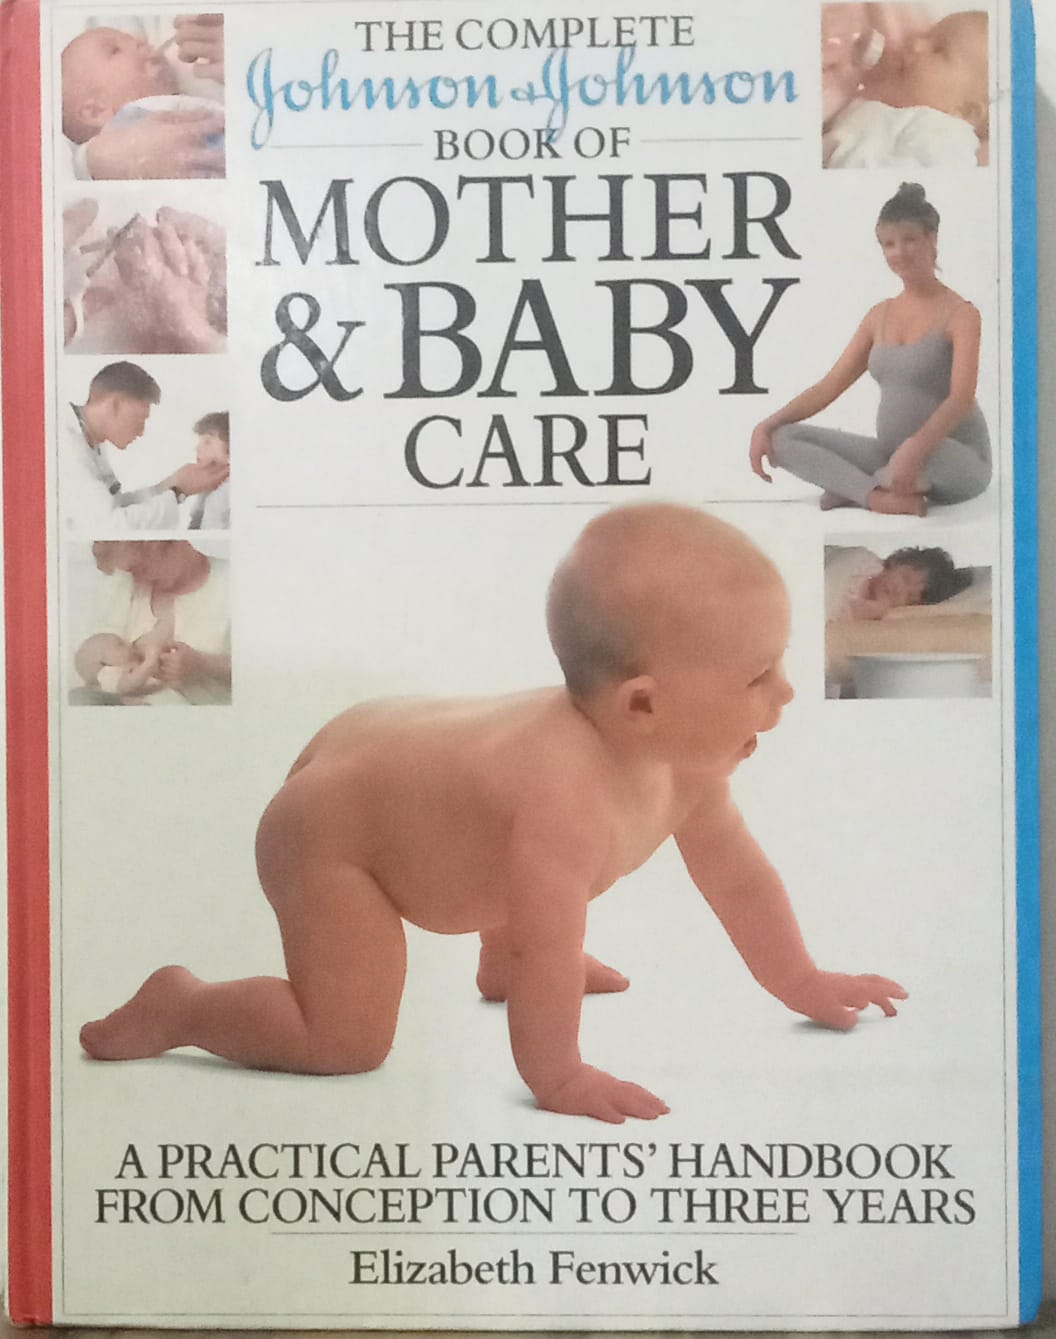 Mother & Baby Care [Hardcover] [RARE BOOK]